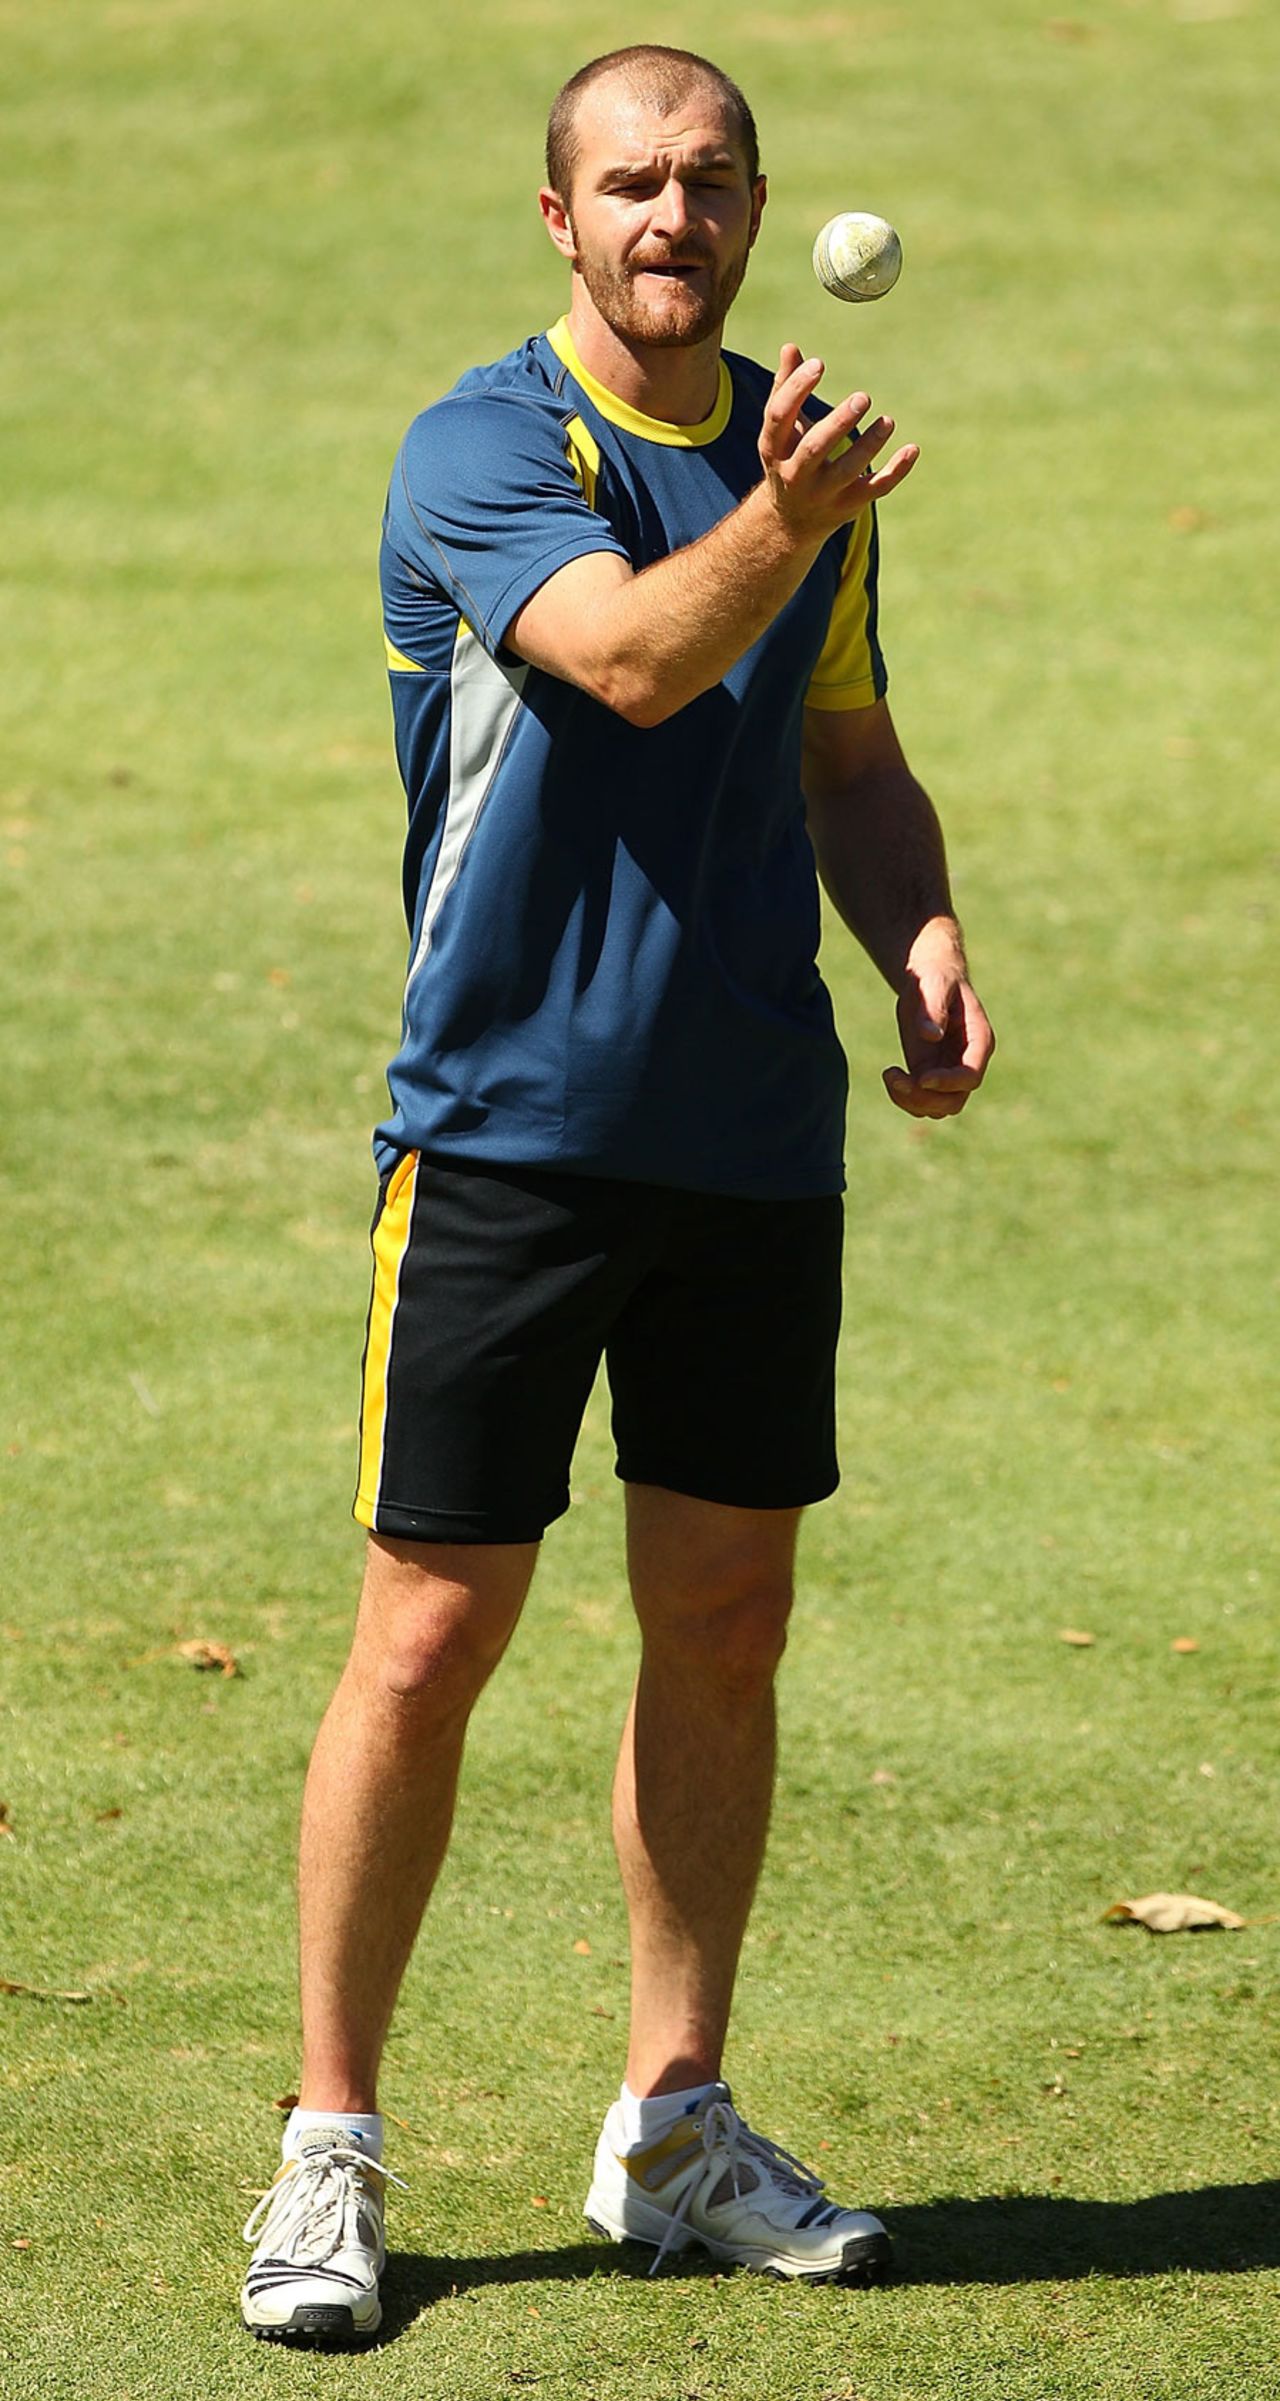 Jason Krejza trains the day before he is expected to make his ODI debut, Perth, February 5, 2011